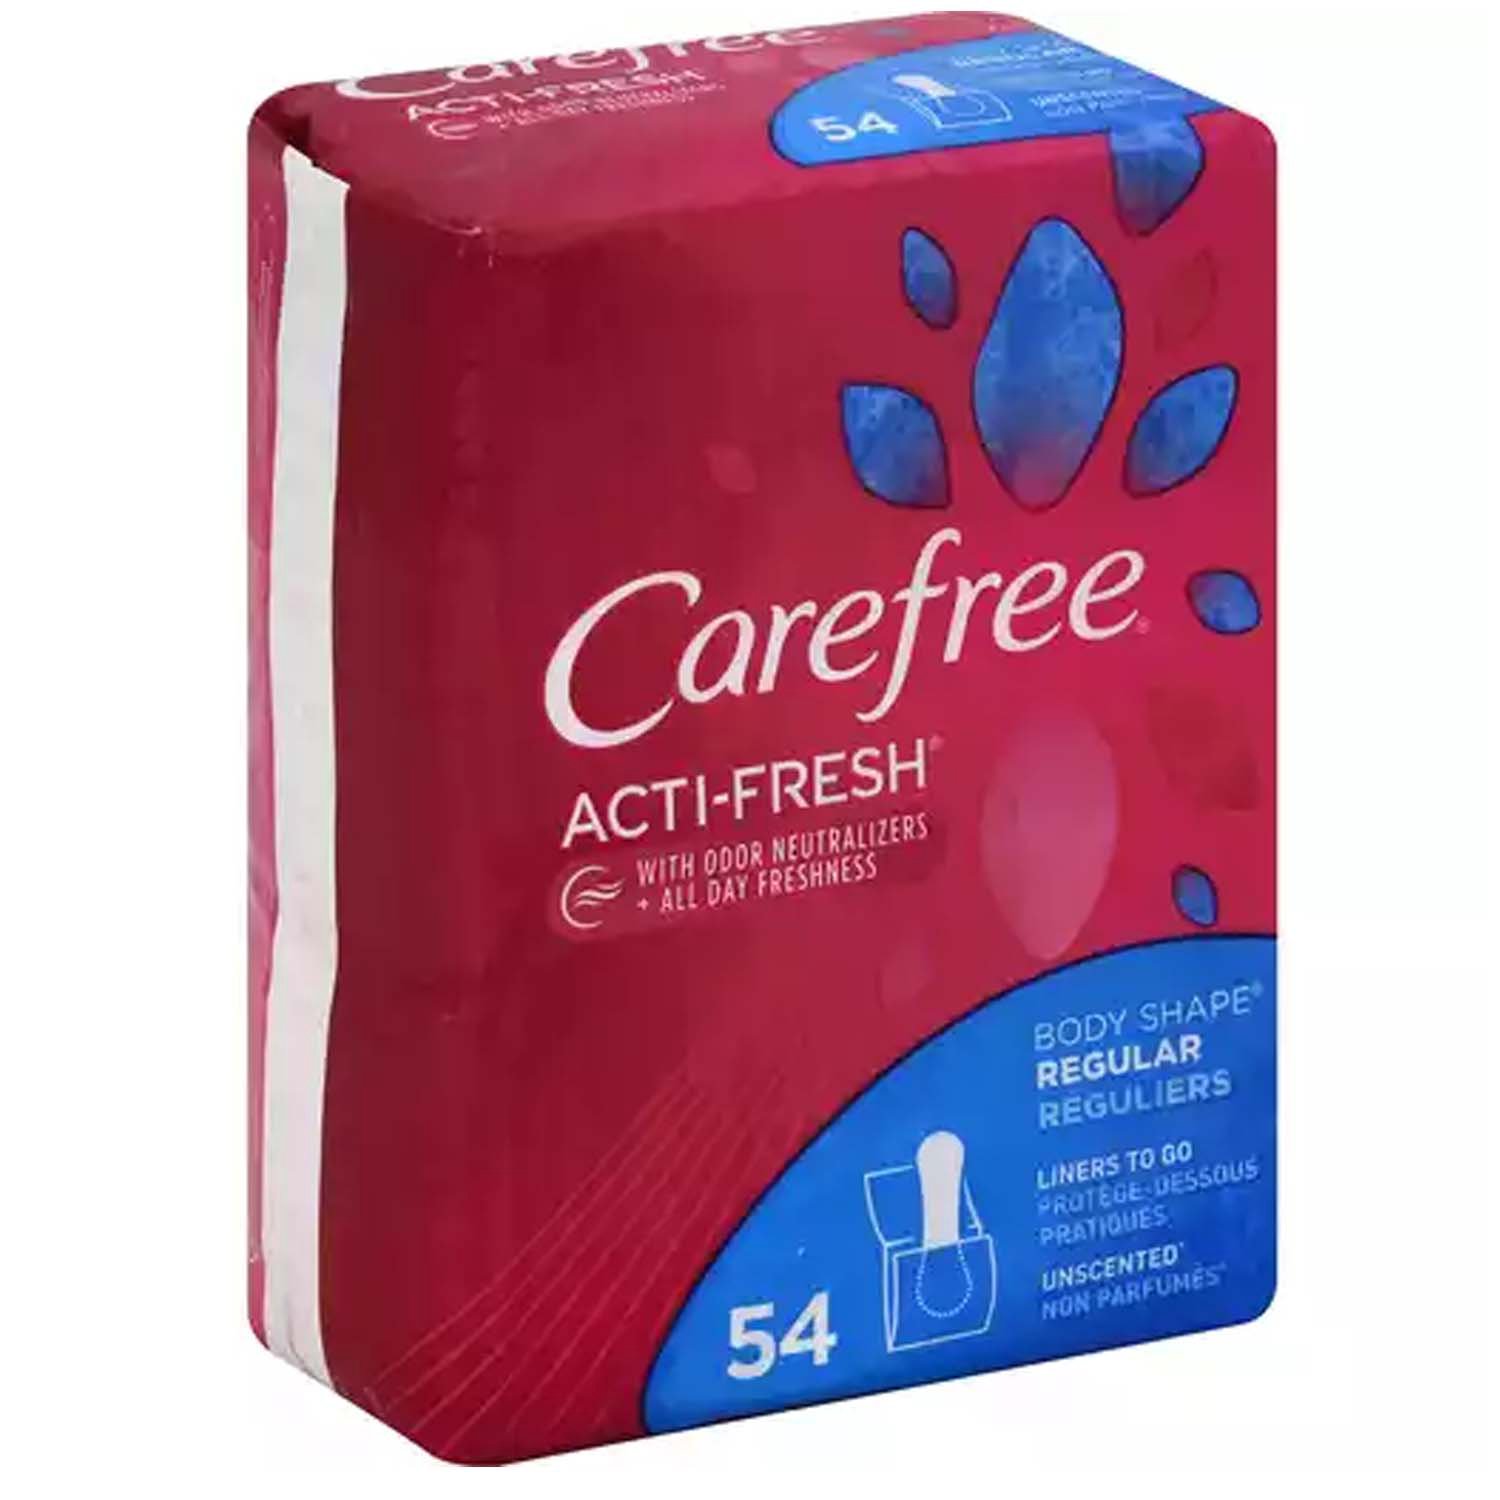 Carefree Acti-Fresh Unscented 54 Regular Daily Liners 